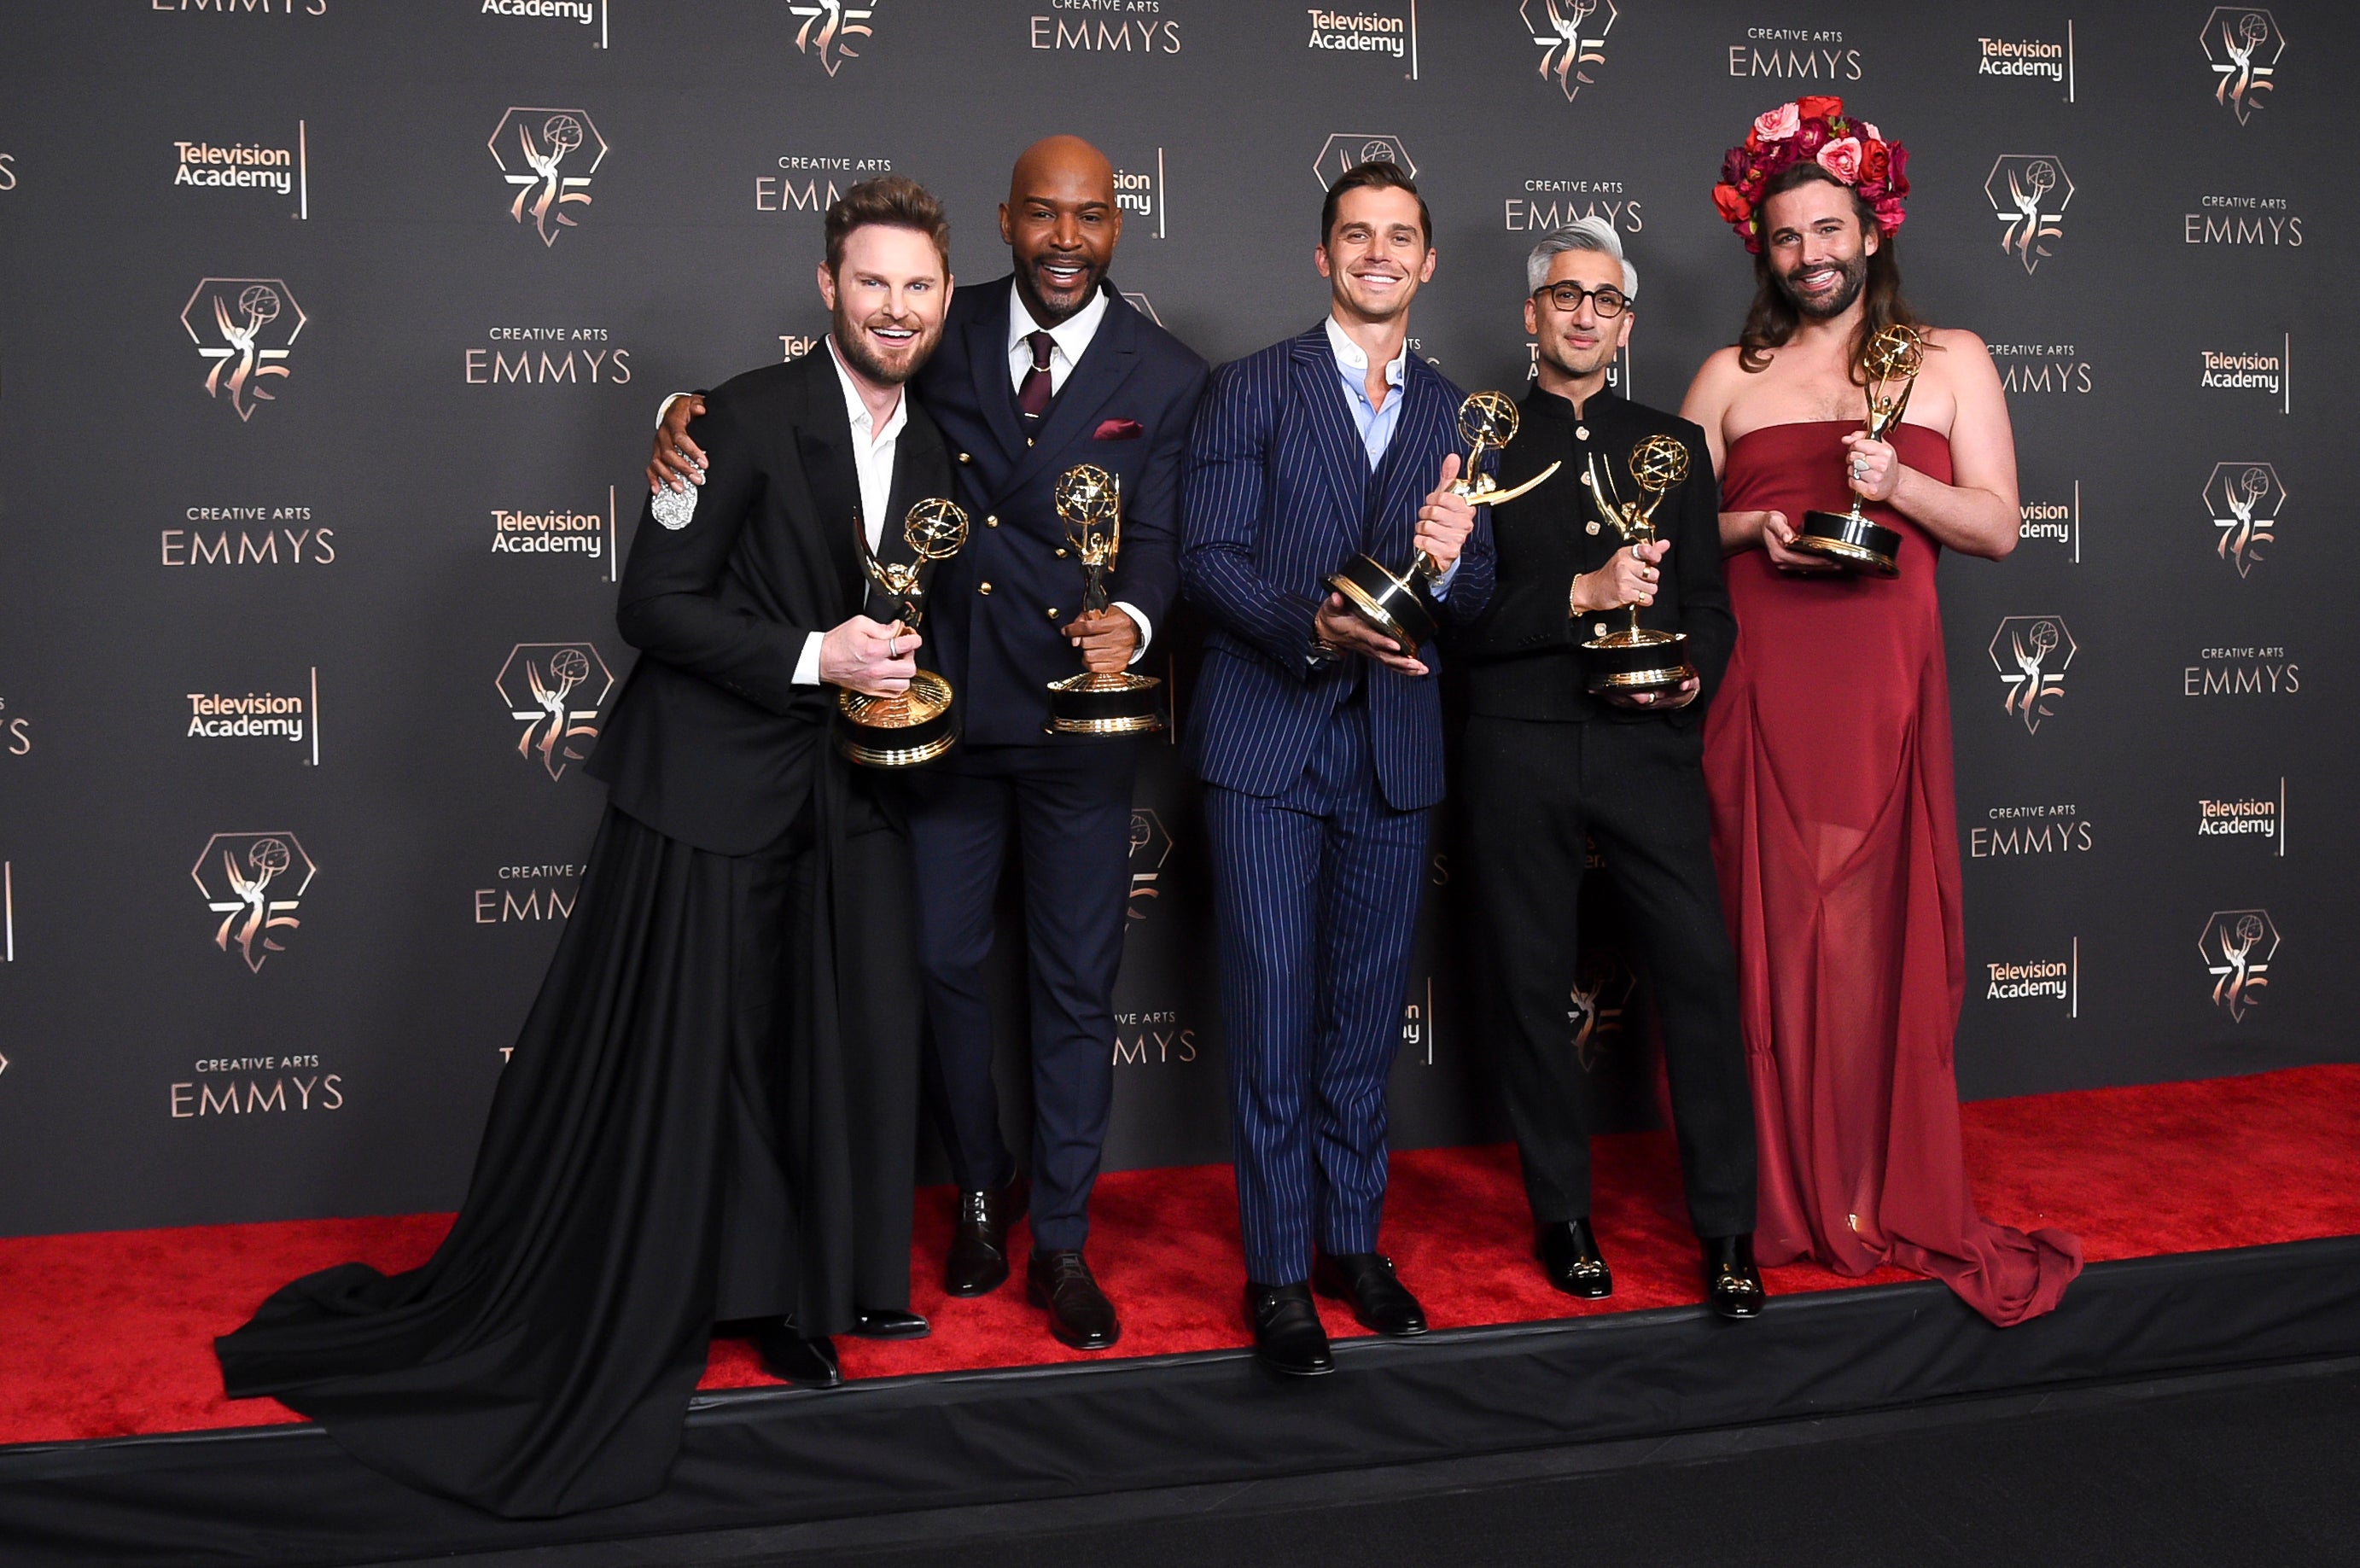 Cast of ‘Queer Eye’ reunited for 75th Creative Arts Emmy Awards earlier this year